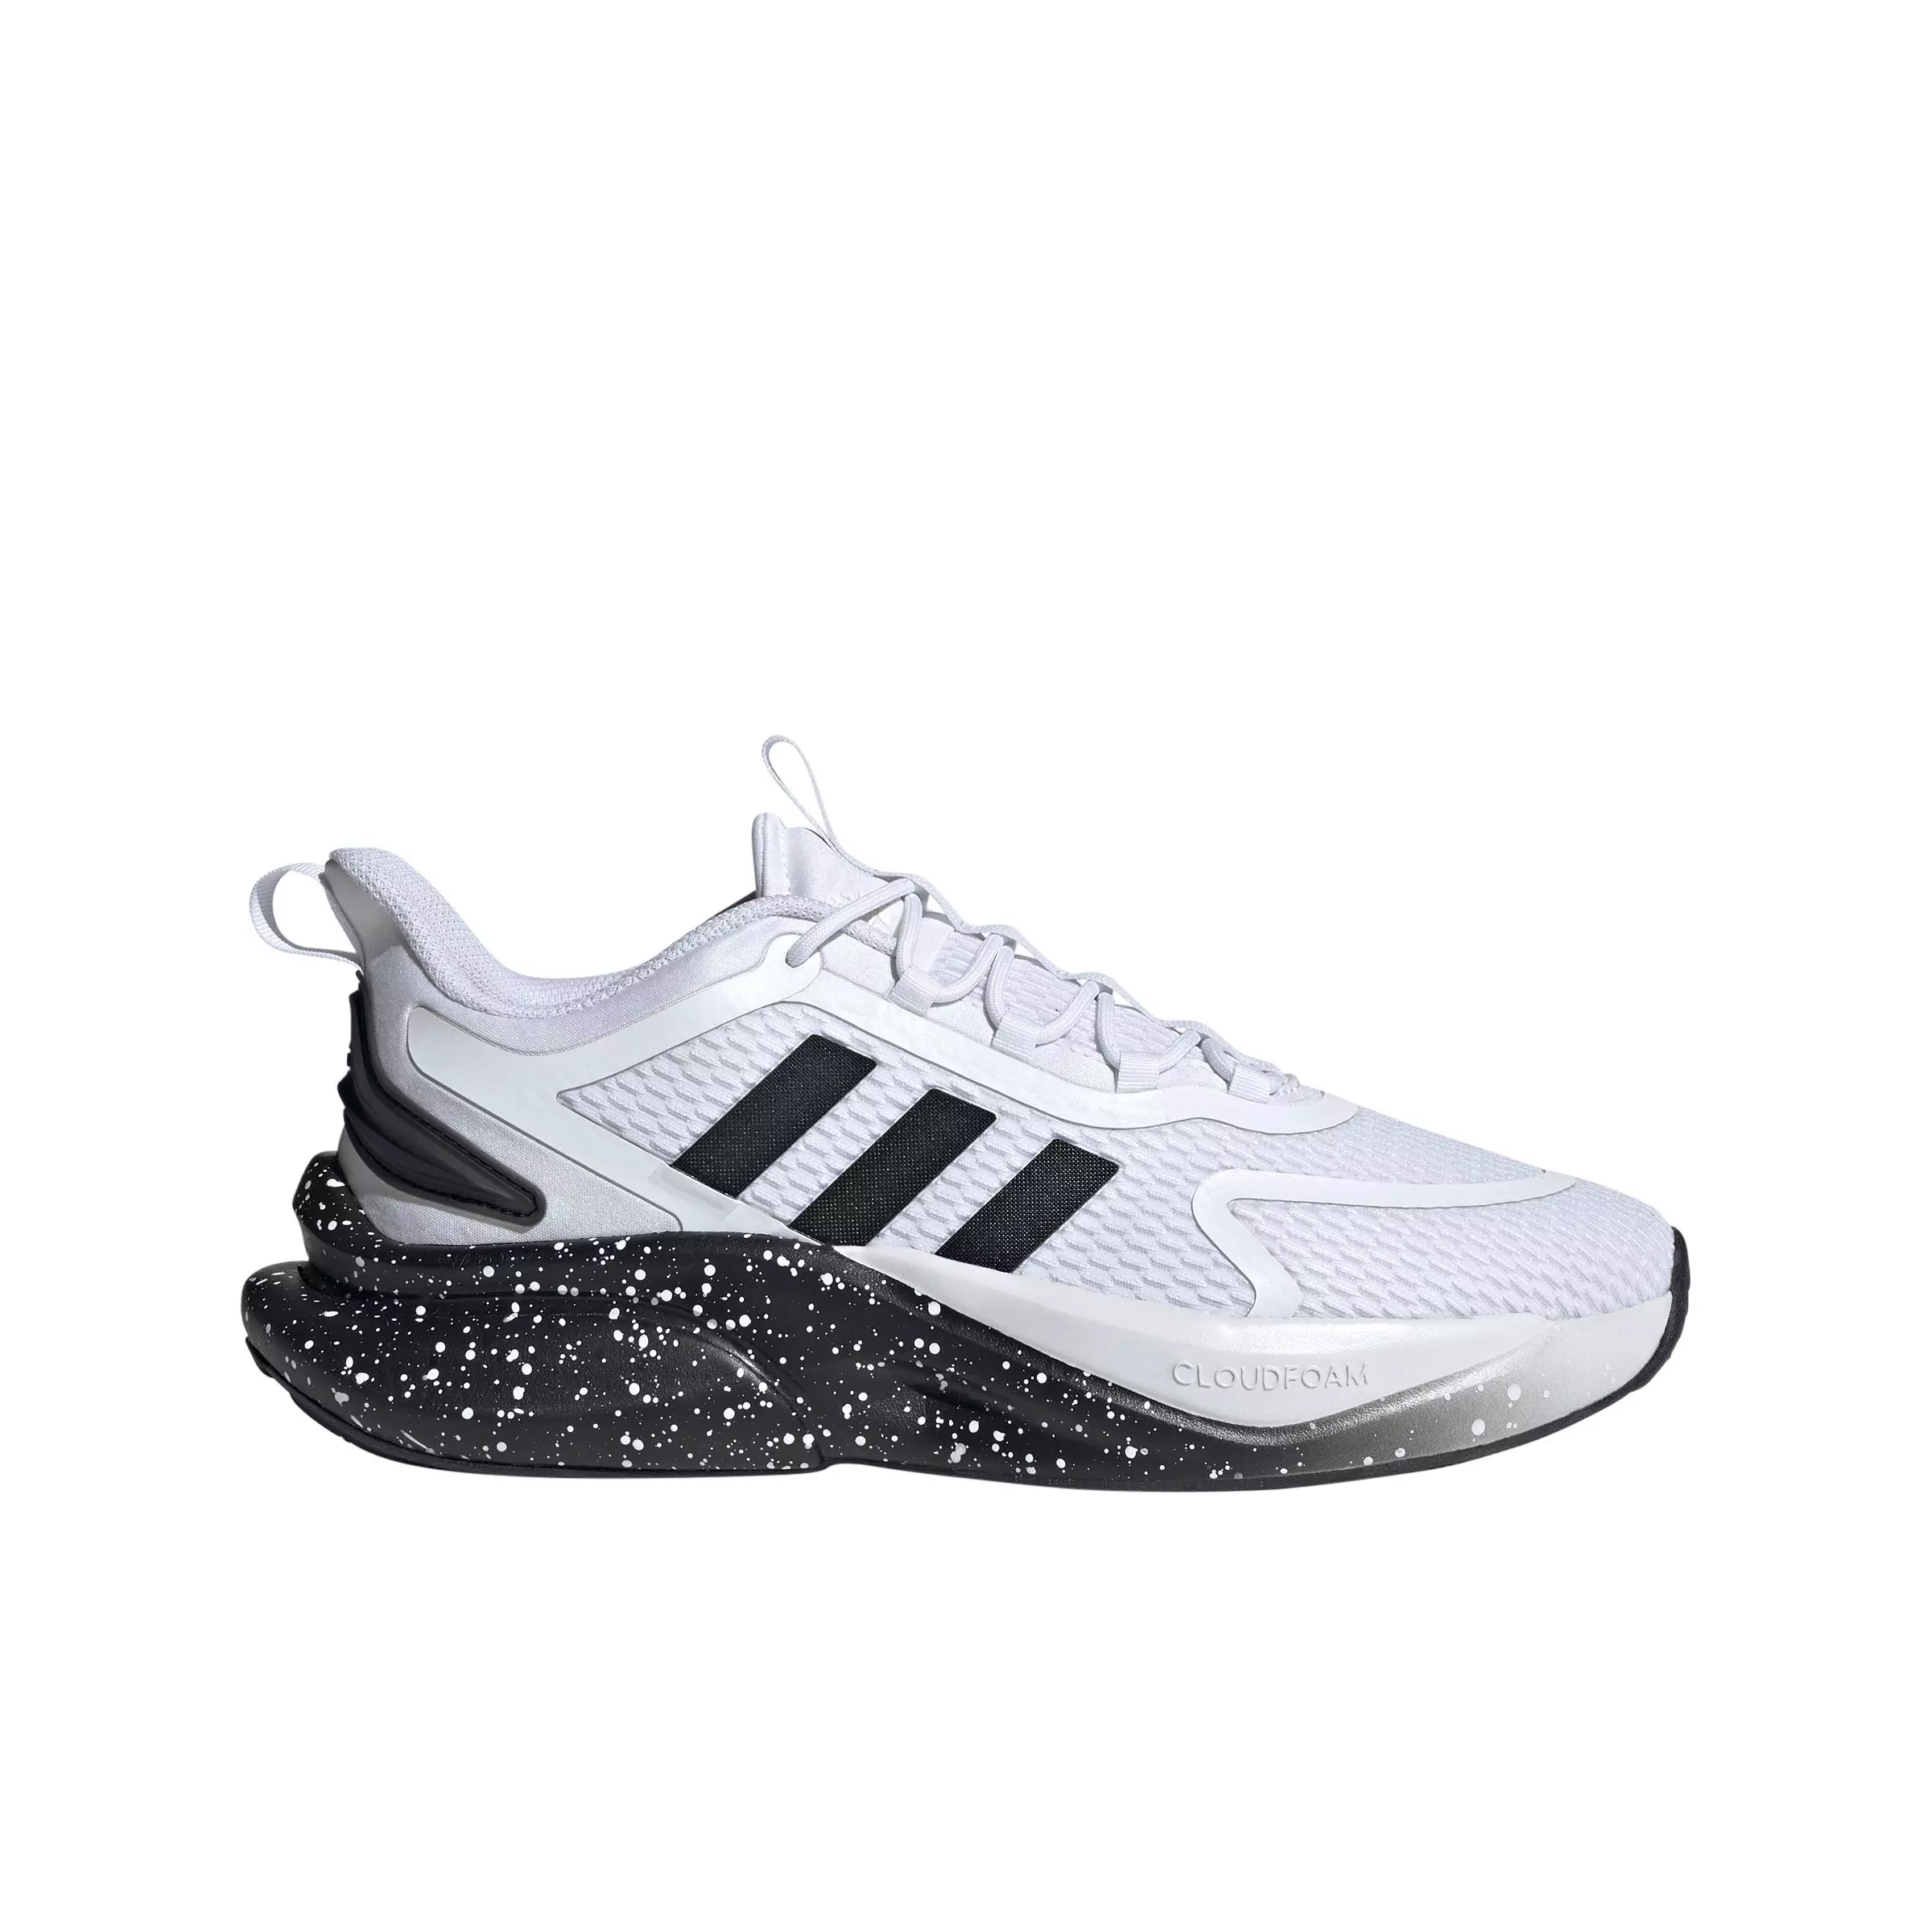 adidas Alphabounce+ Sustainable Bounce Ftwr White/Core Black/Core